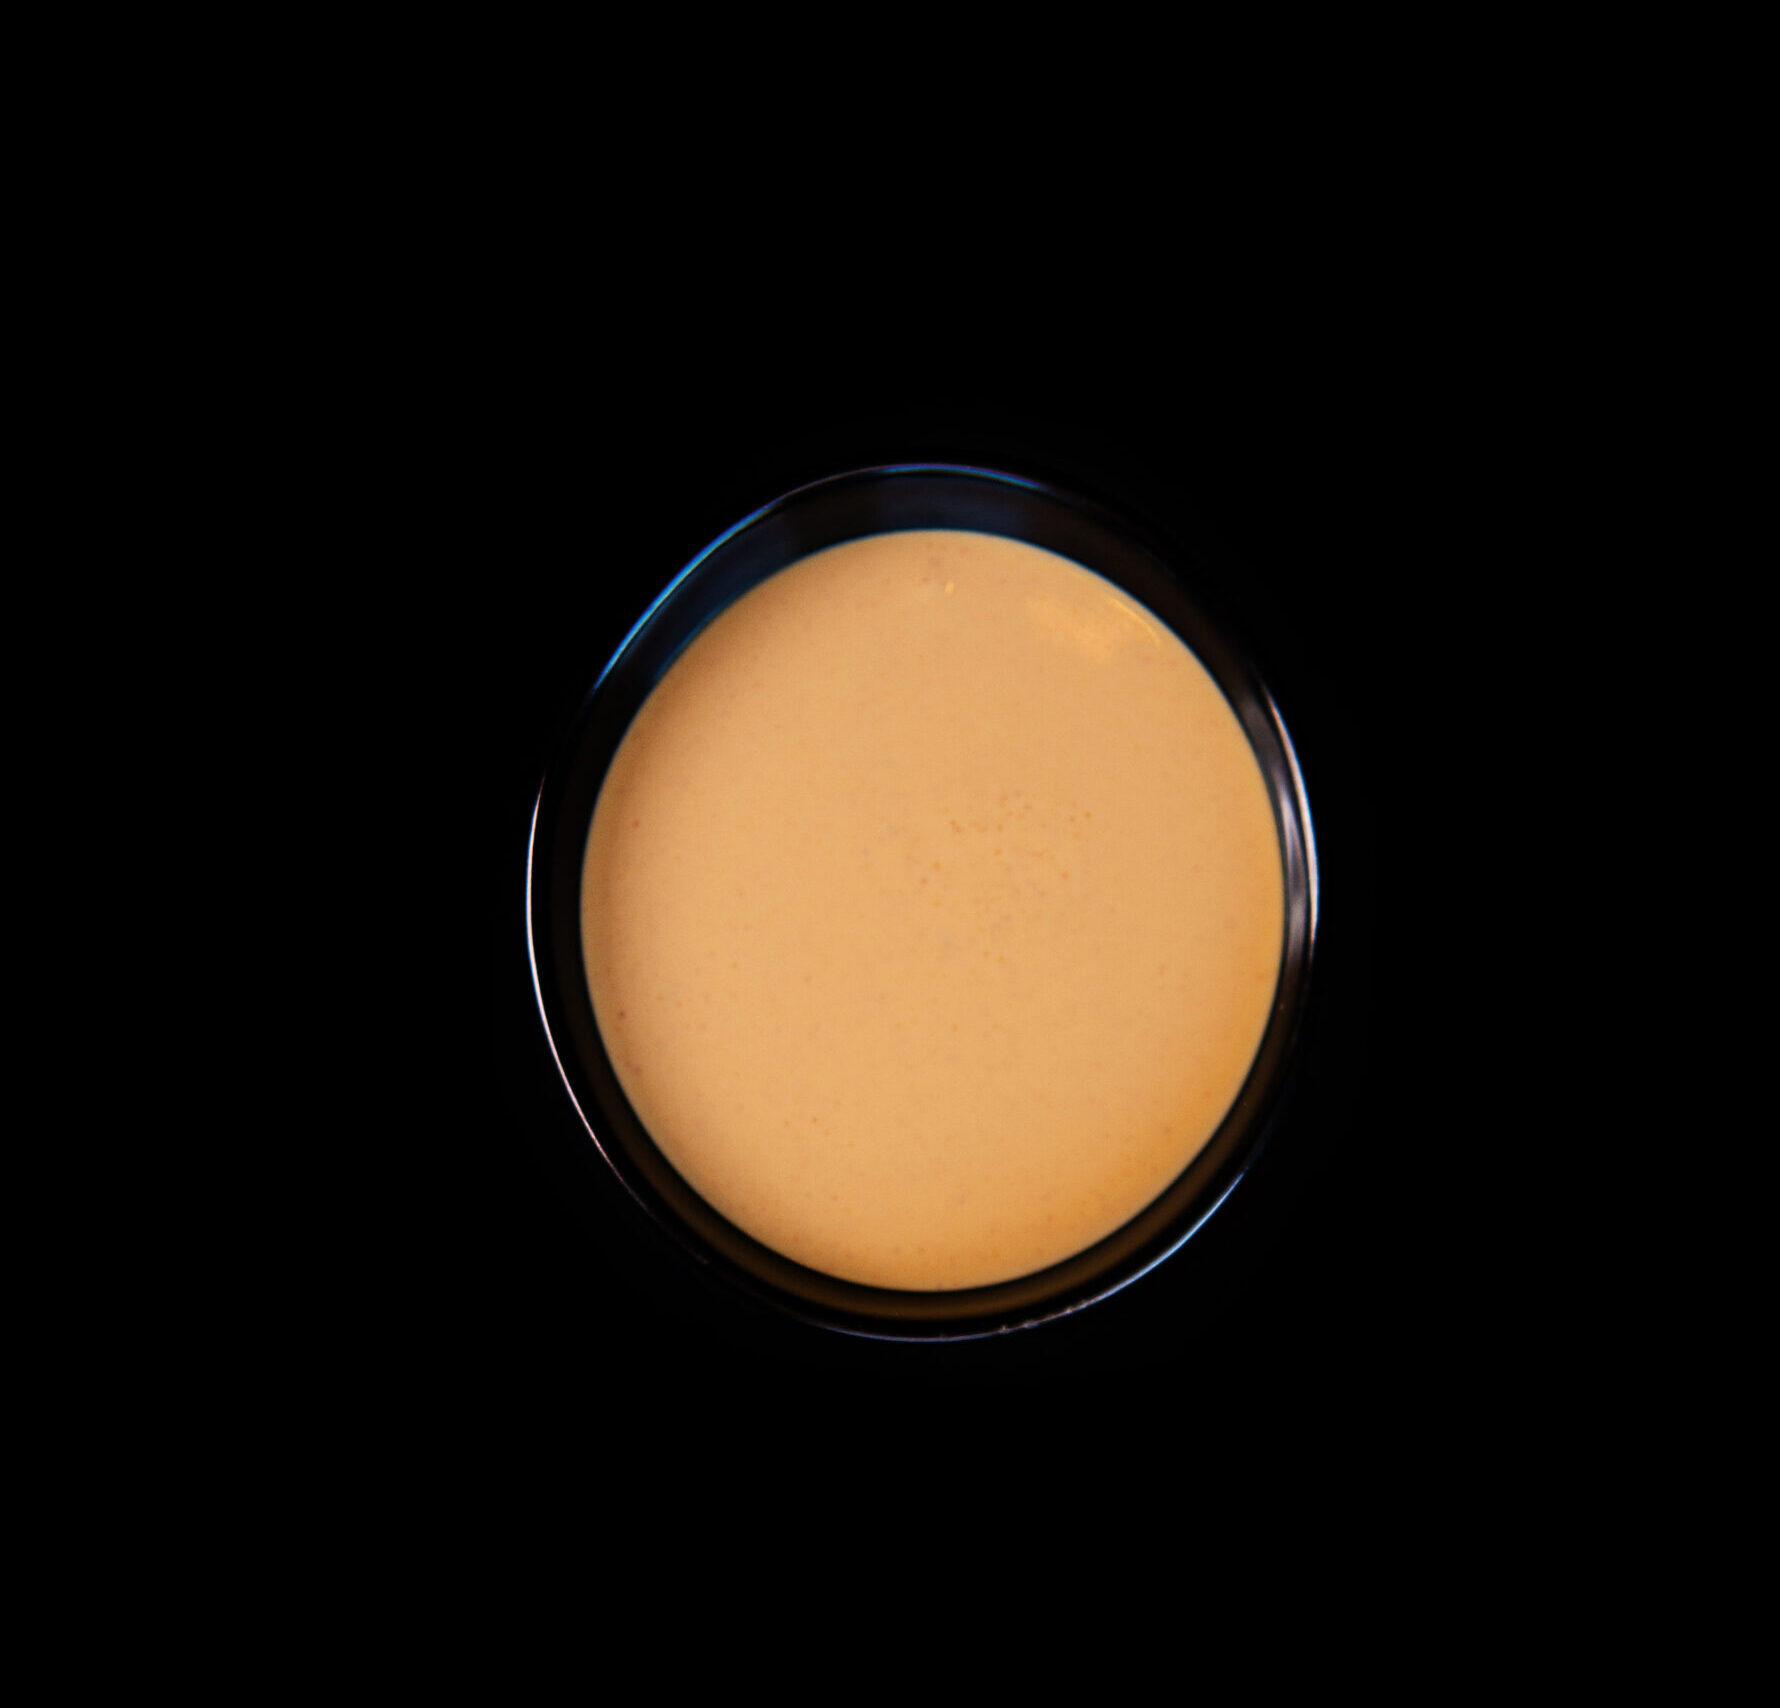 A black background with an orange circle in the middle.